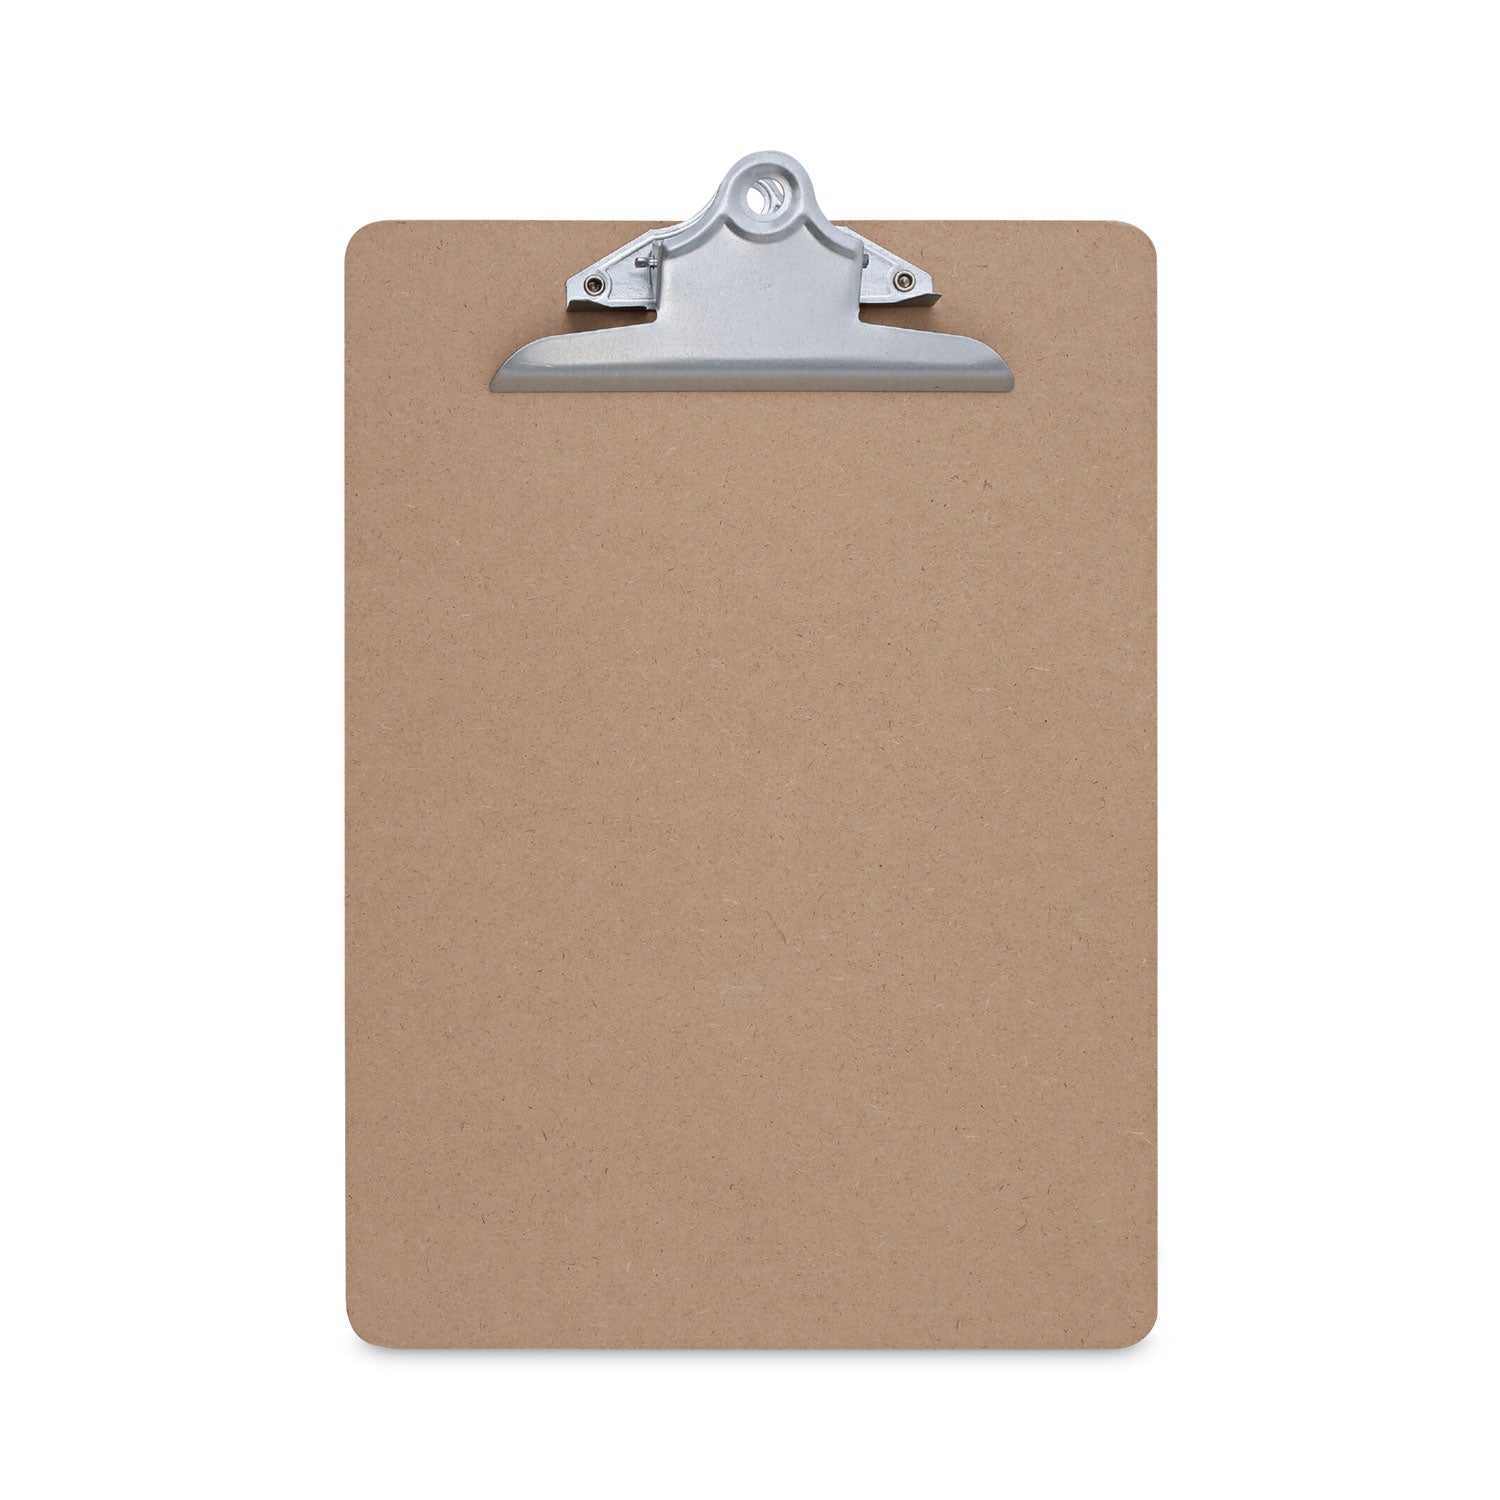 hardboard-clipboard-125-clip-capacity-holds-85-x-11-sheets-brown-3-pack_unv40304vp - 1